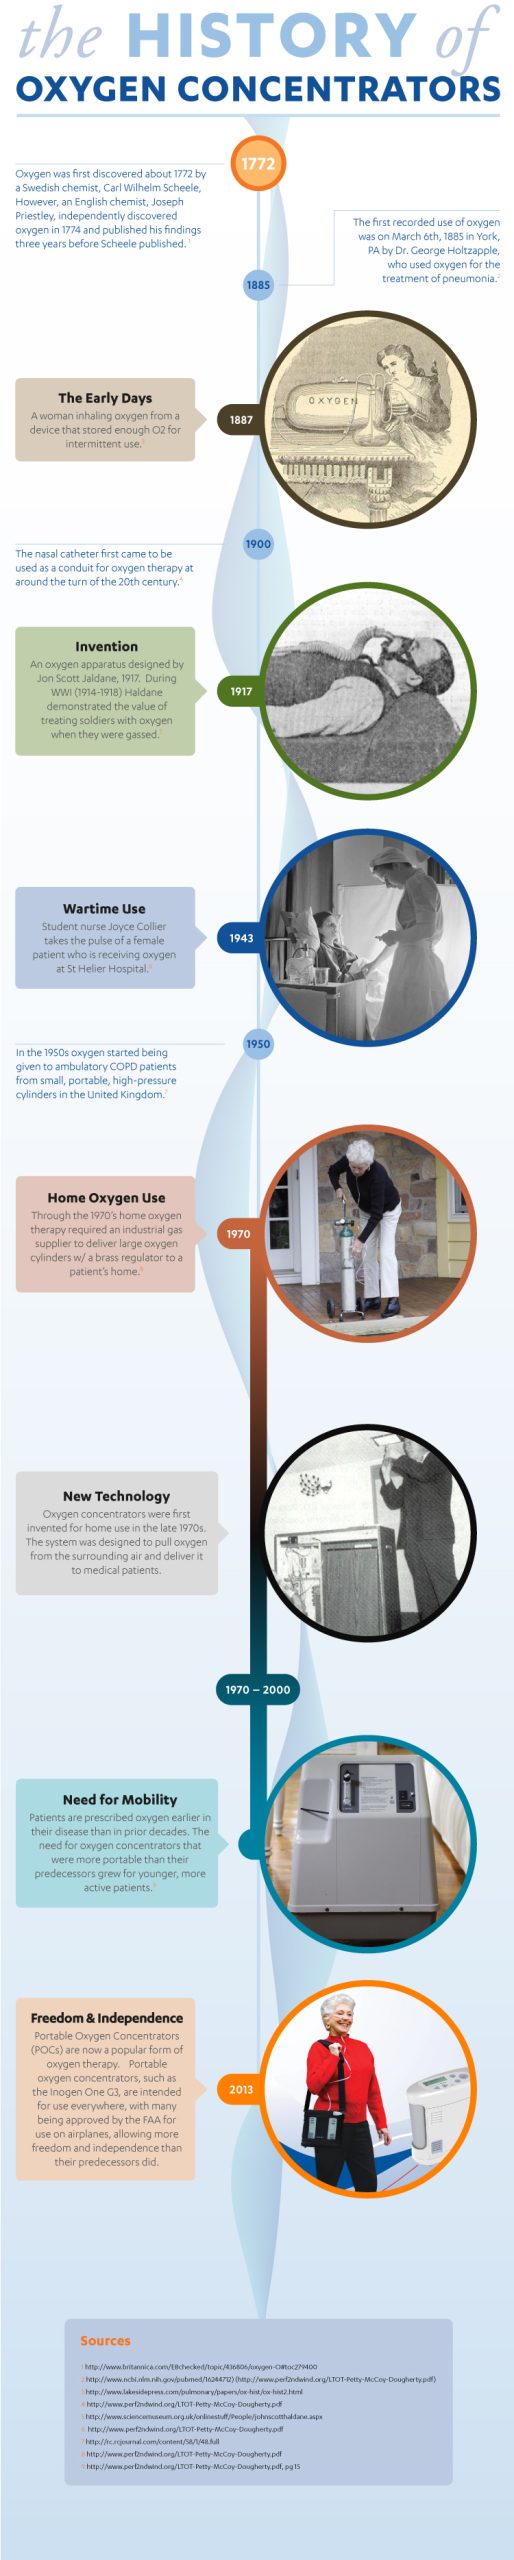 History of oxygen concentrators infographic